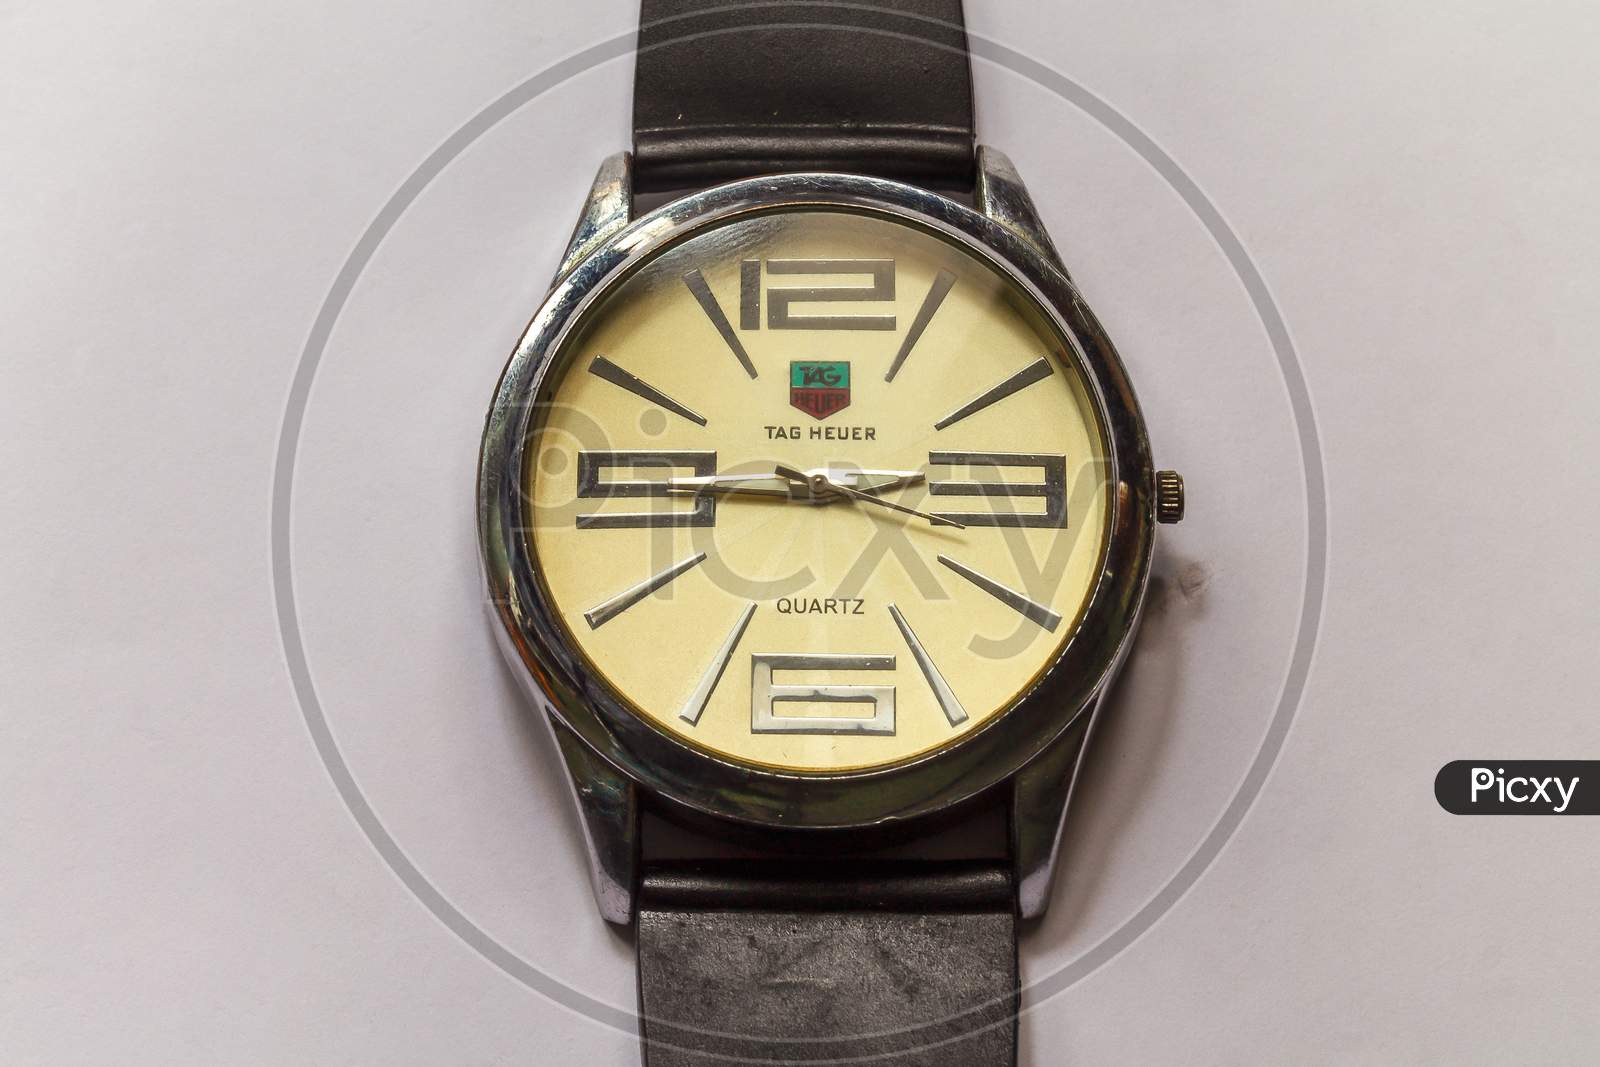 A View Of Men Wrist Watch Over White Background In Landscape Orientation